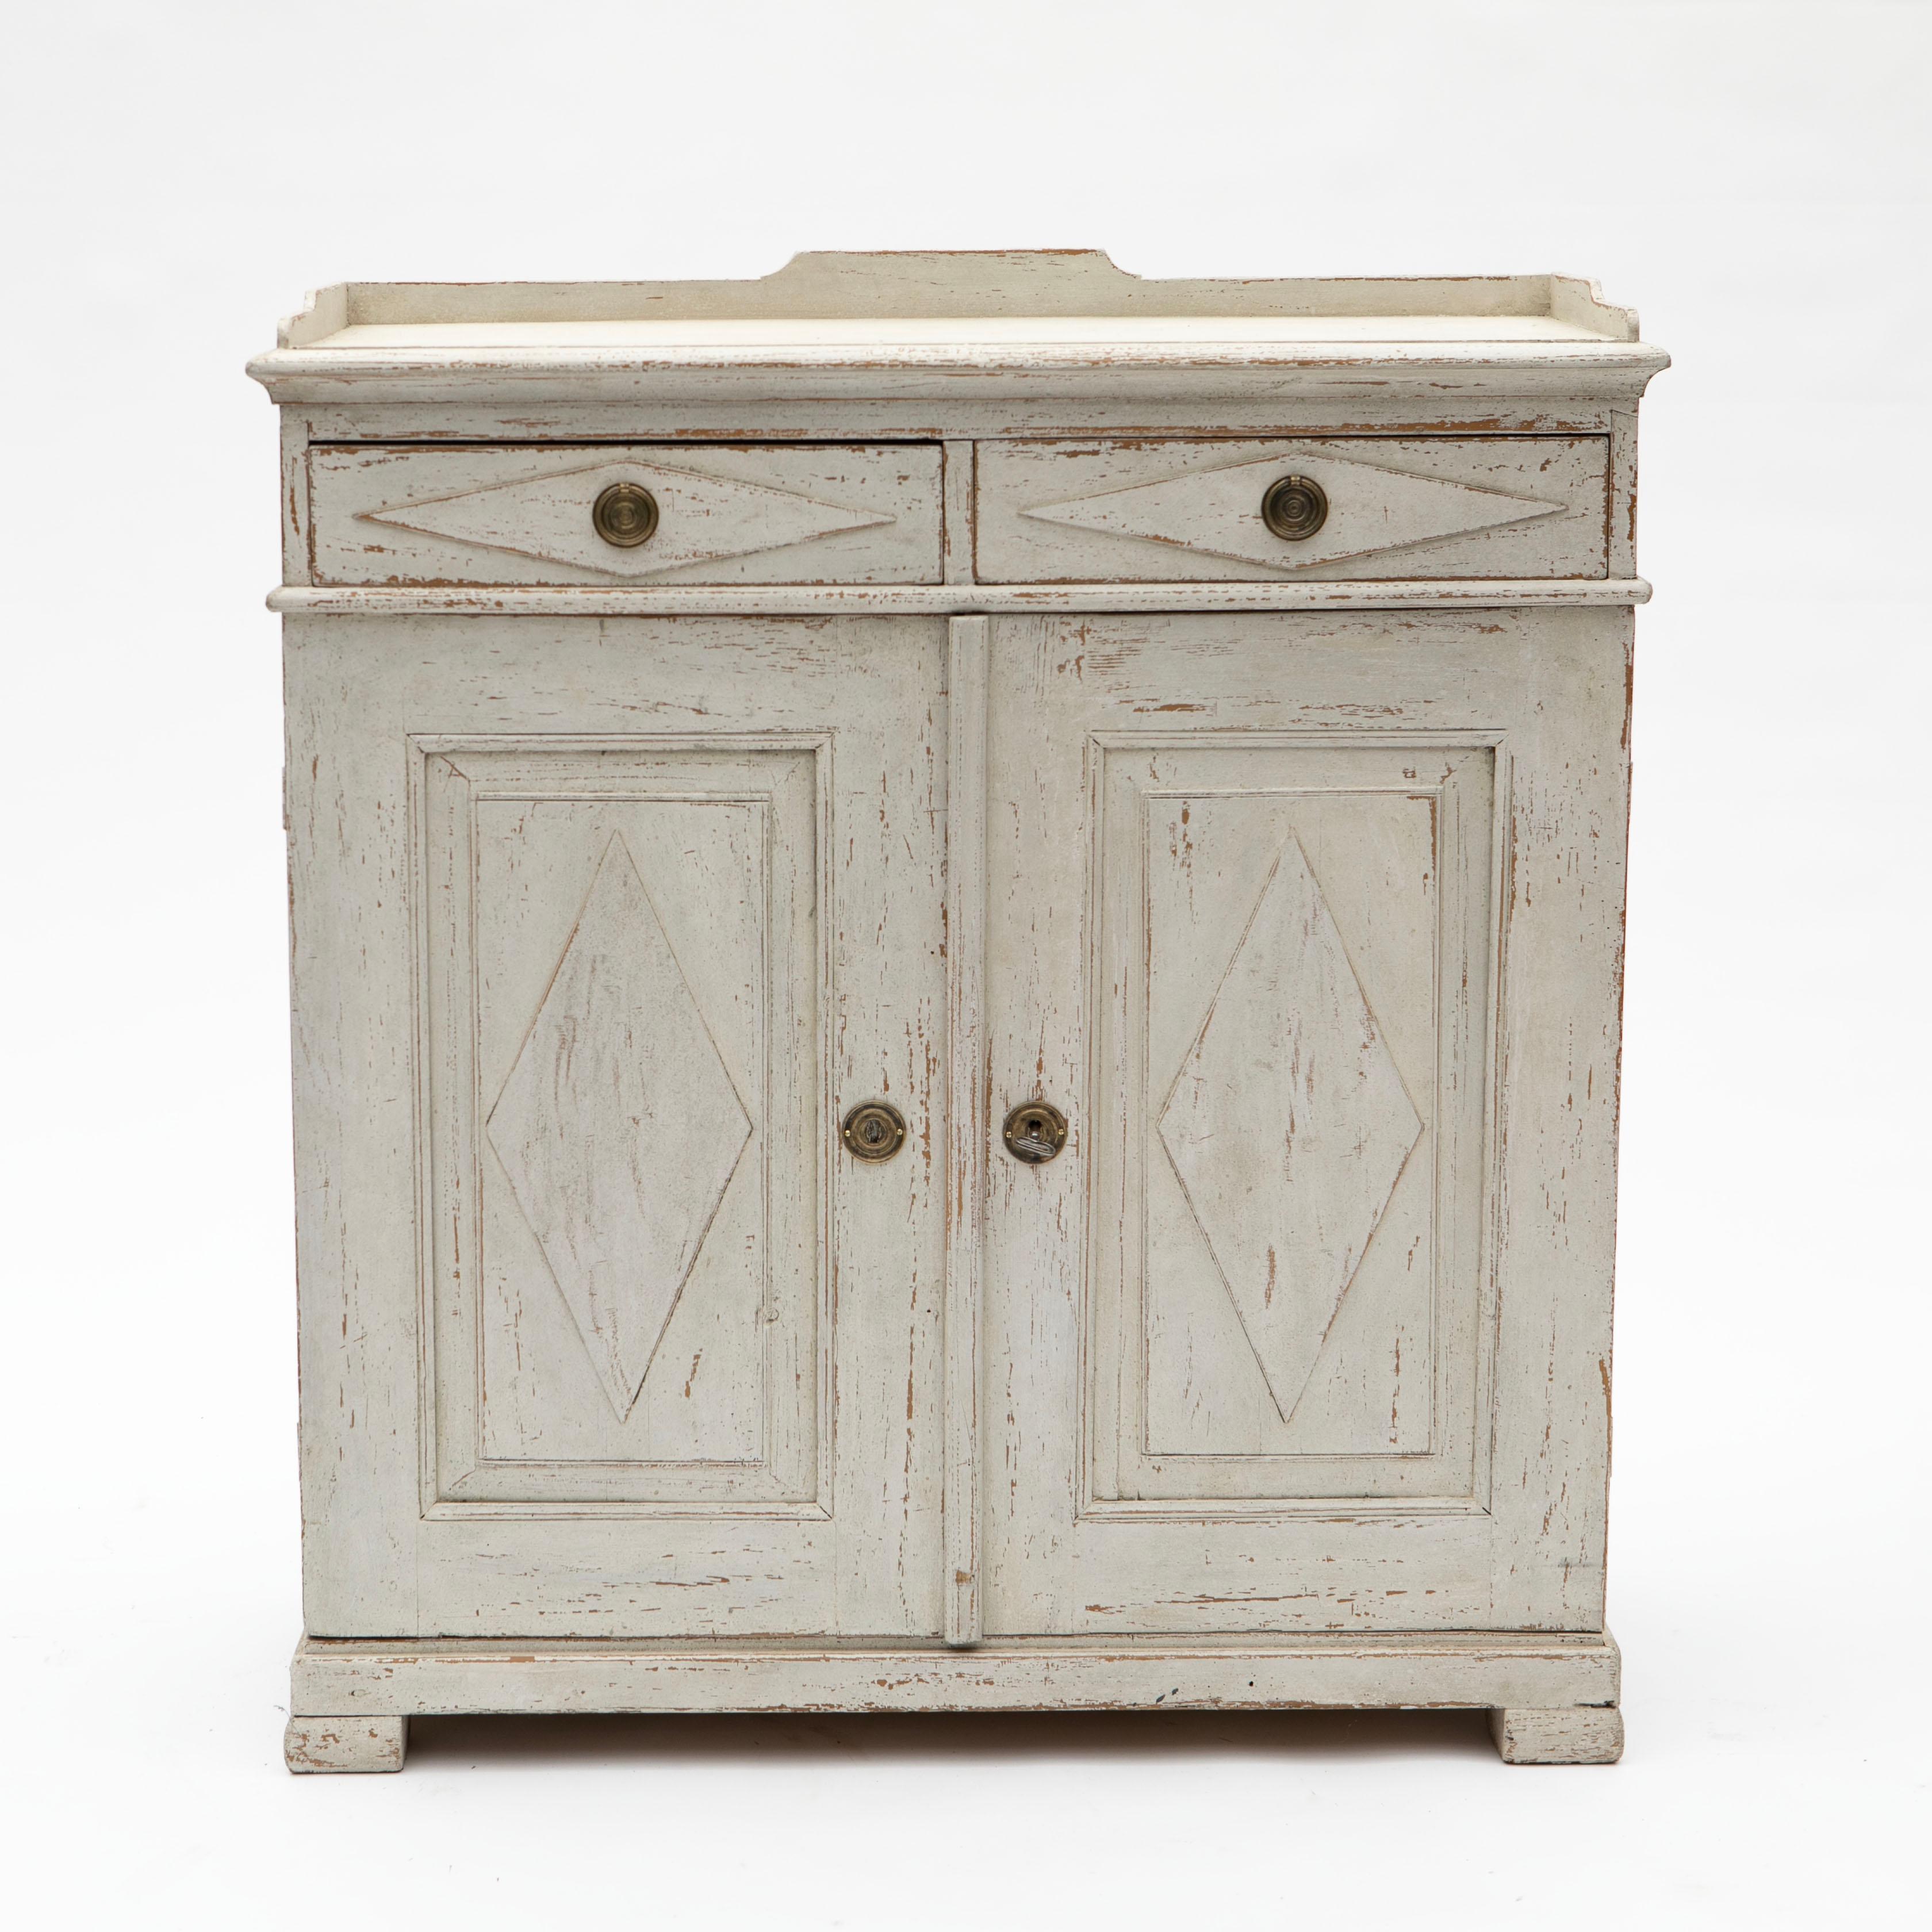 A tall antique Swedish Gustavian style sideboard or cupboard crafted in pine and later professionally painted in light grey with authentic distress and patina.
wo top drawers, each with carved diamond mouldings and brass fittings.
Below the drawers